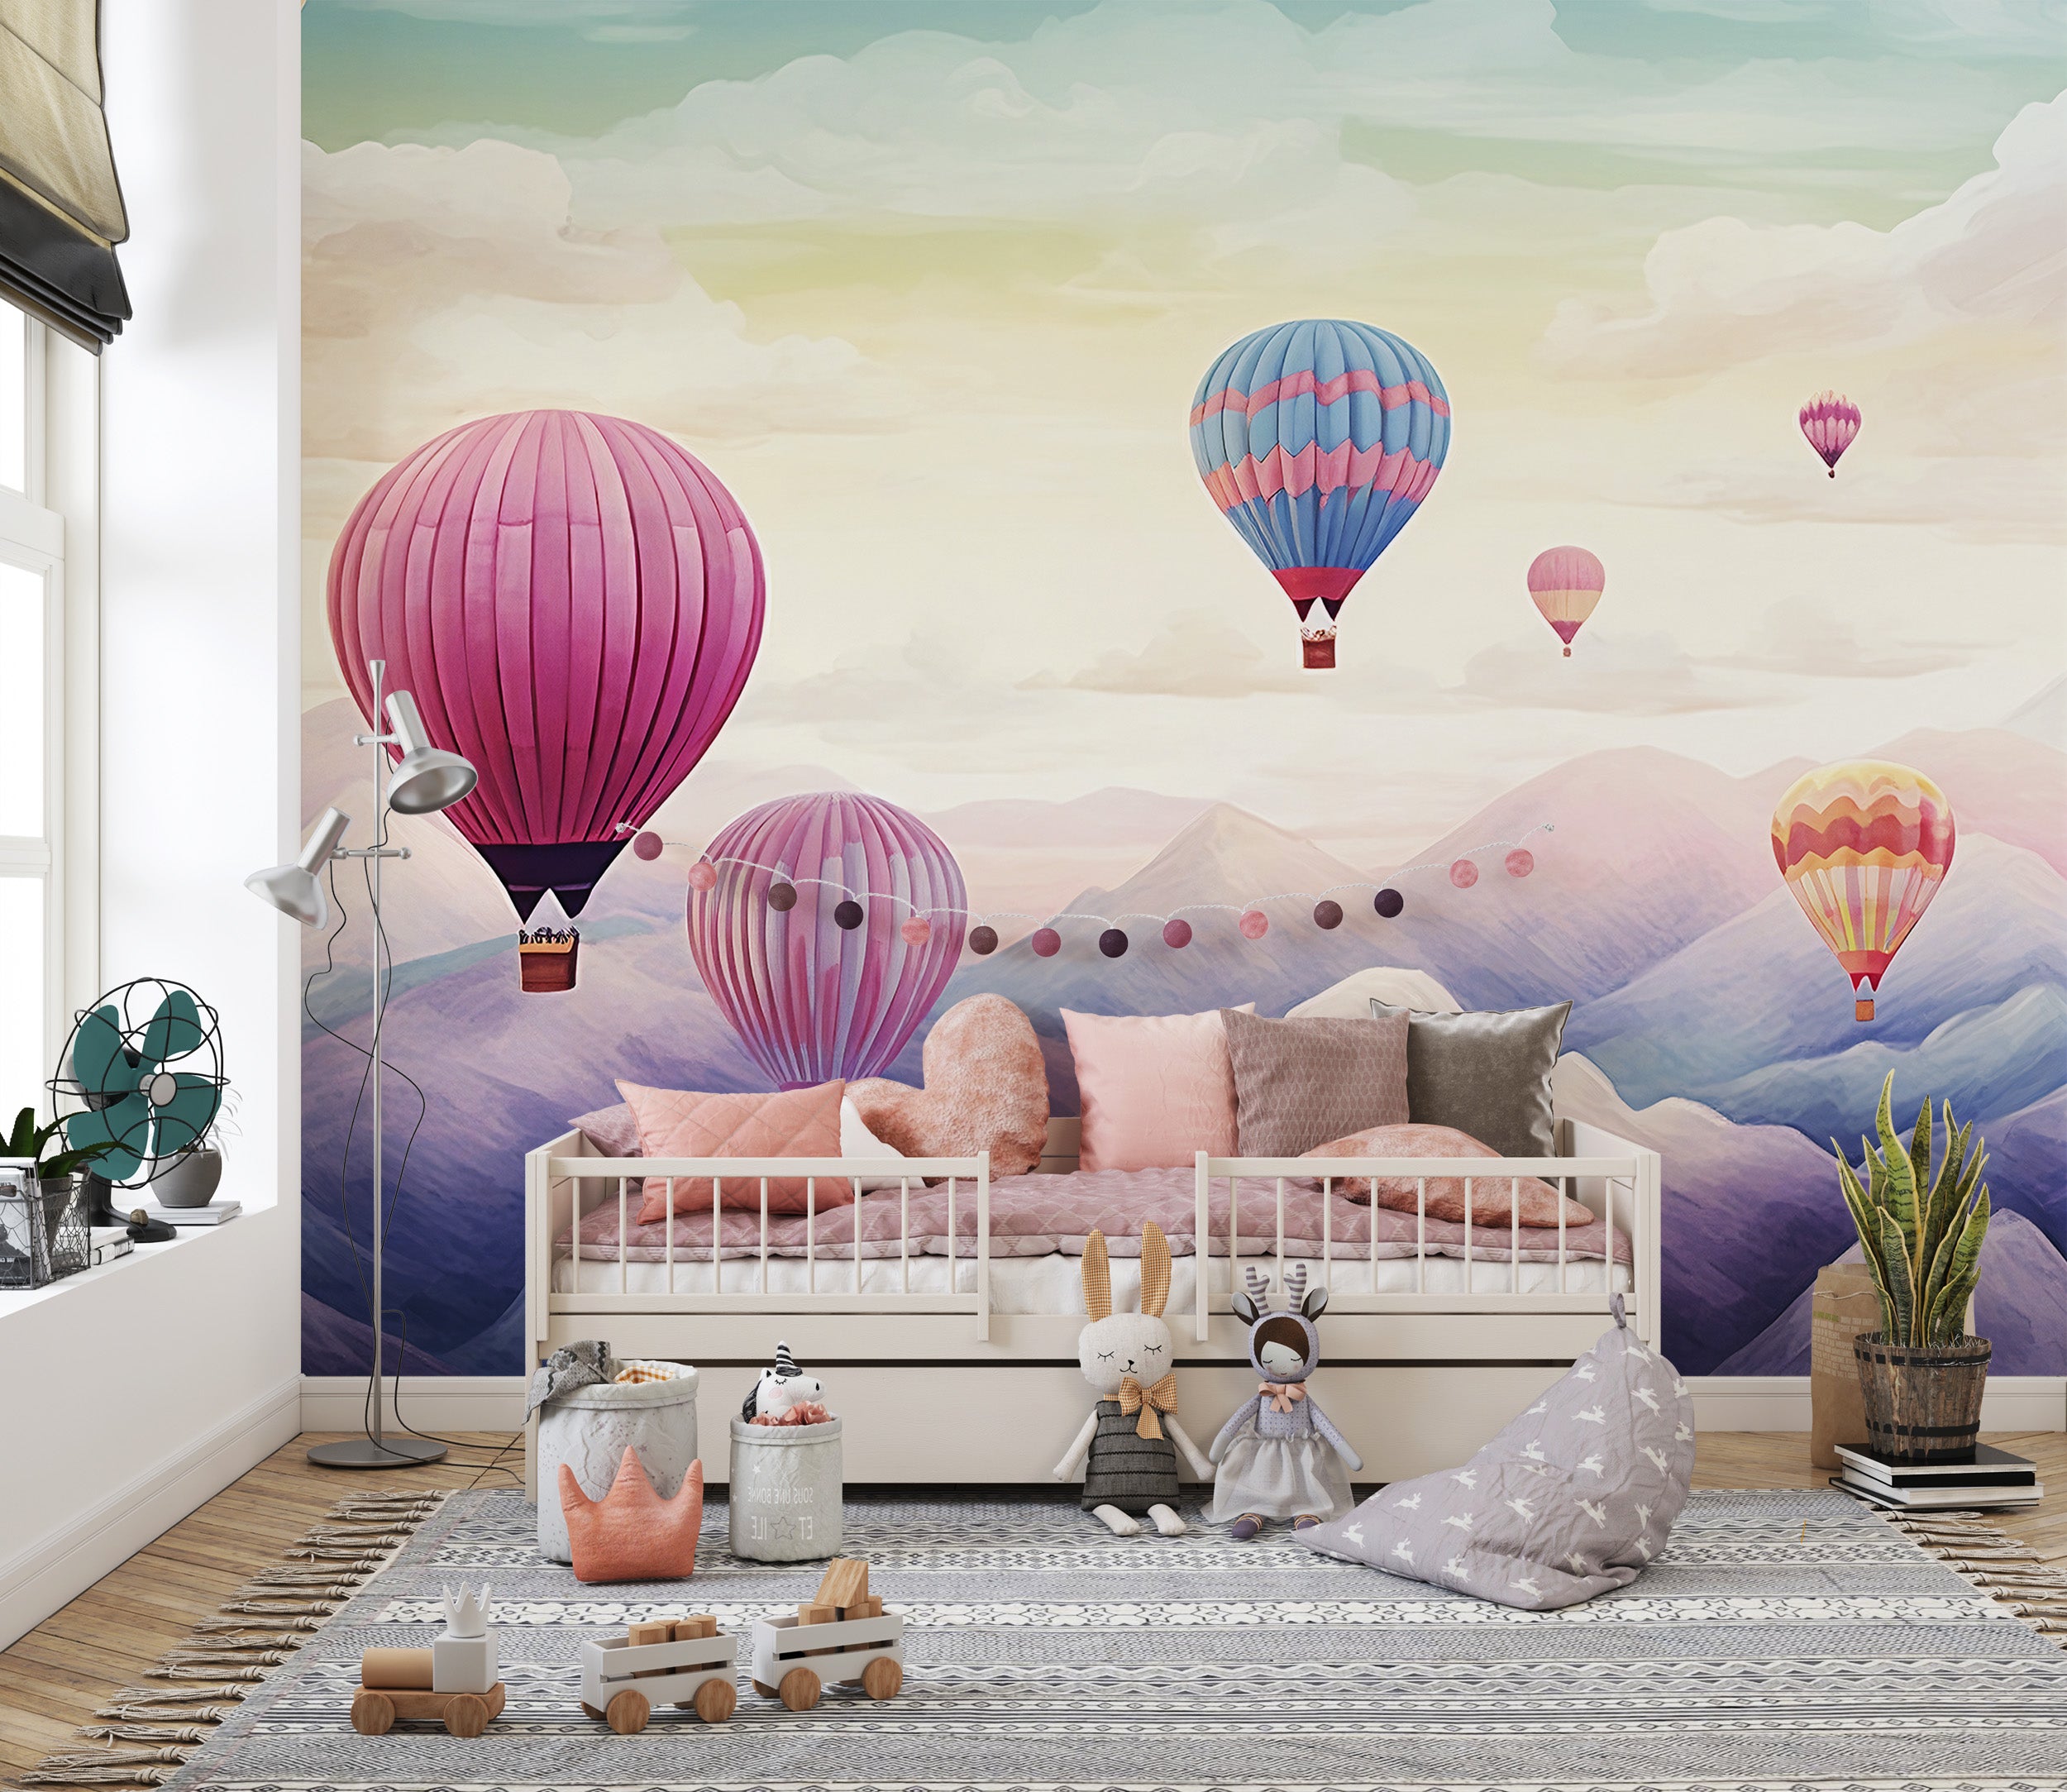 Redefine Your Child's Space with Colorful Balloons